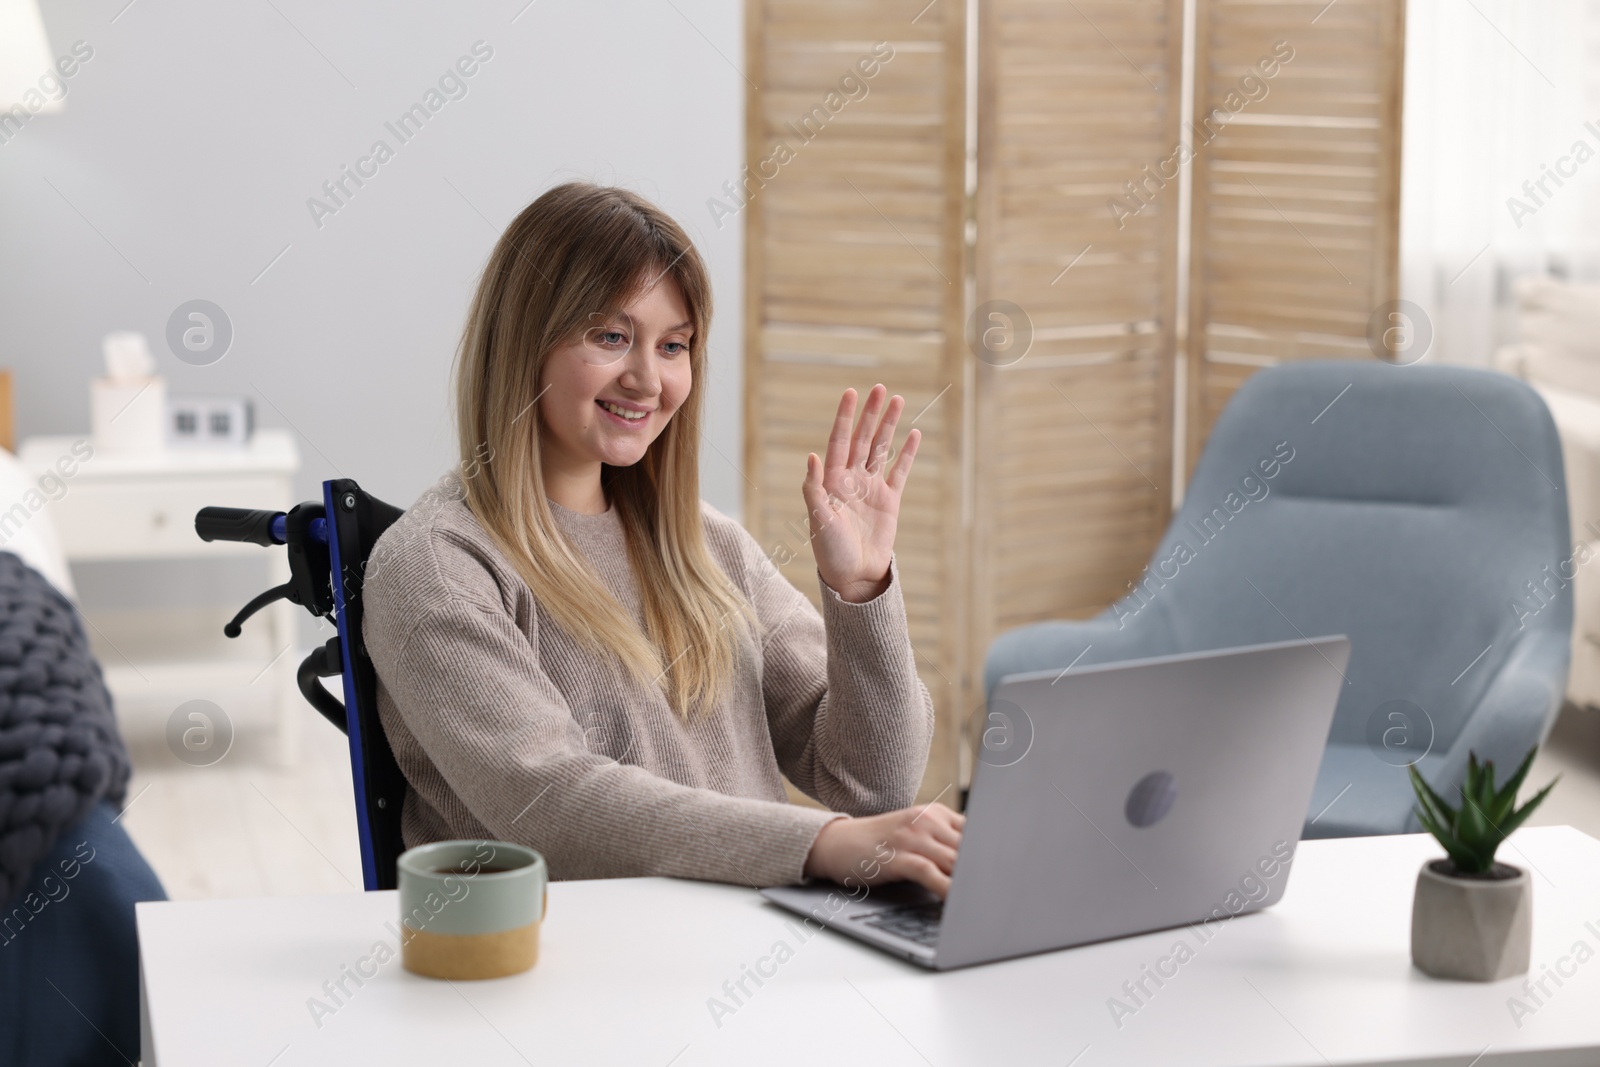 Photo of Woman in wheelchair having video chat via laptop at table in home office